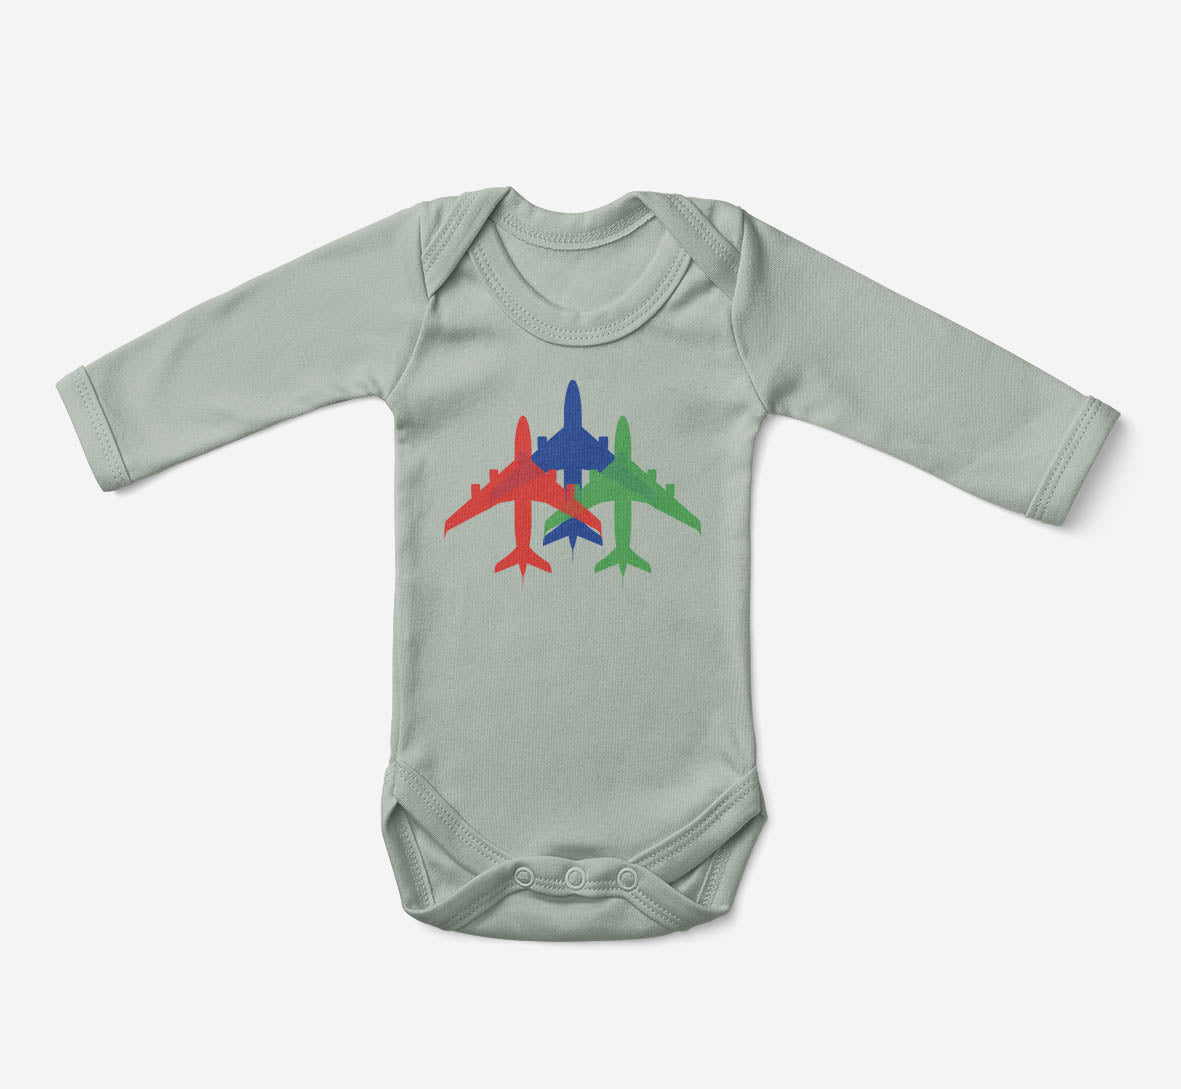 Colourful 3 Airplanes Designed Baby Bodysuits